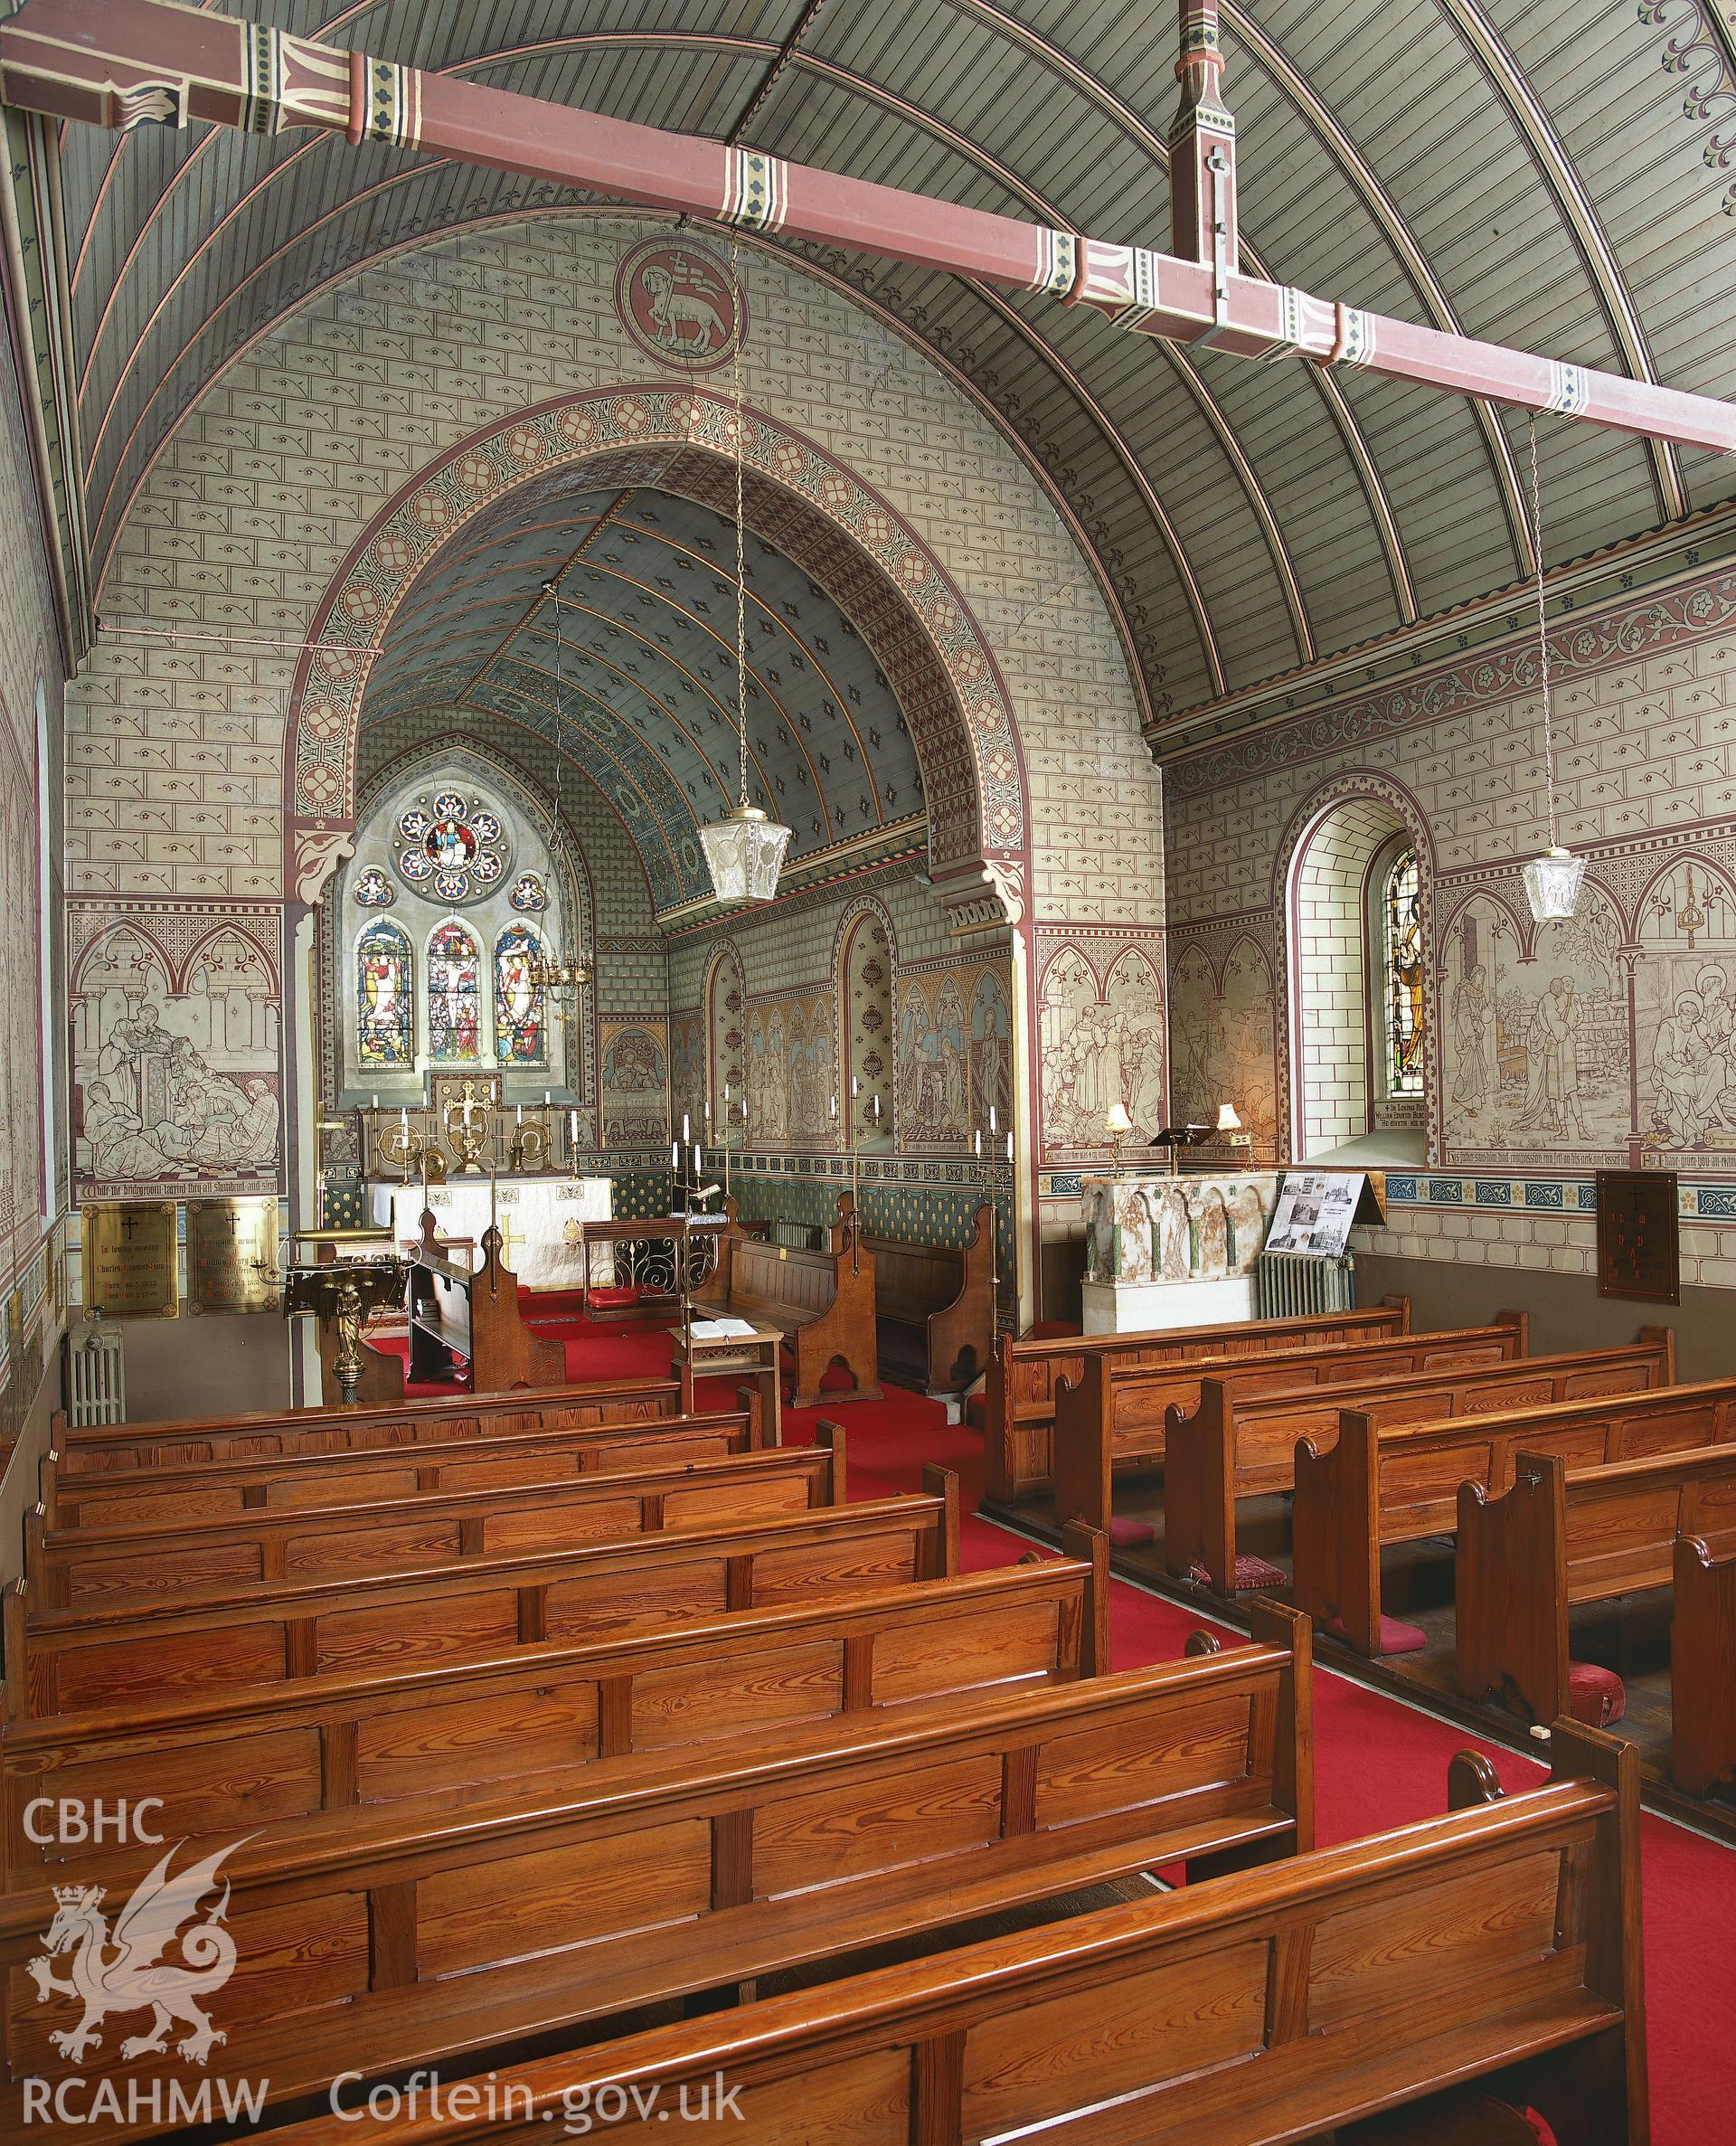 RCAHMW colour transparency of an interior view of Holy Trinity Church, Llanegwad.